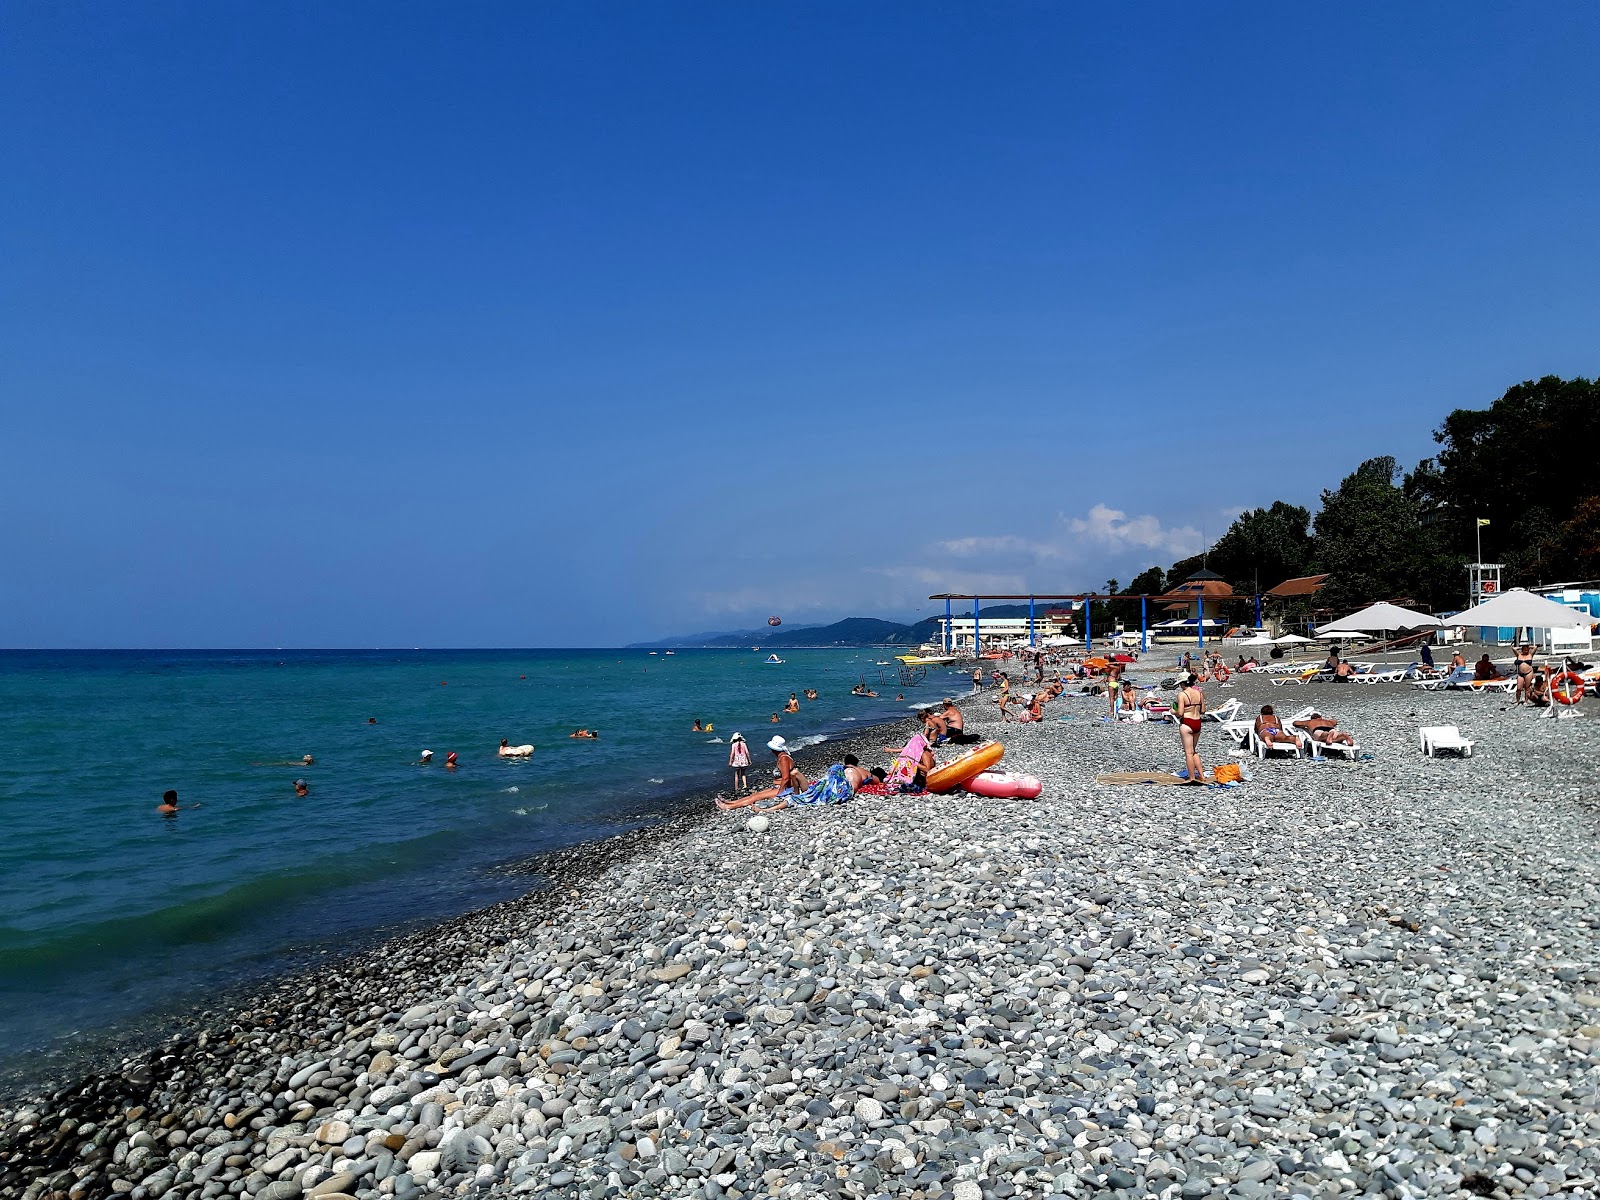 Photo of Loo beach with gray pebble surface